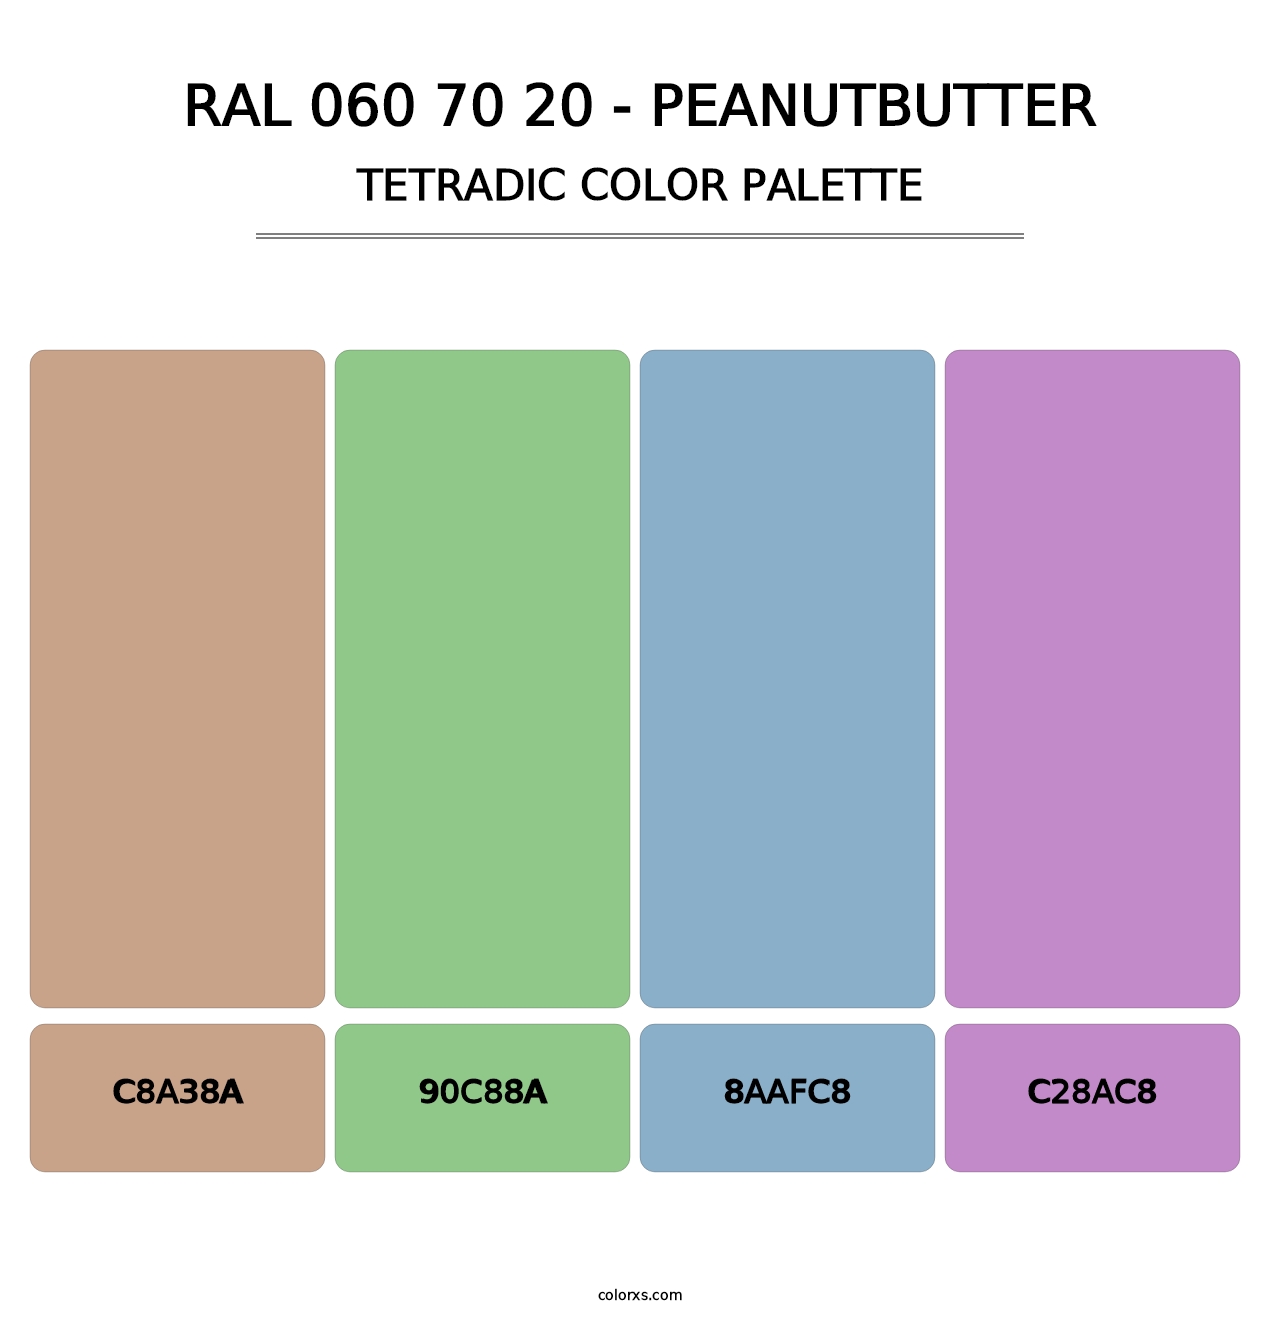 RAL 060 70 20 - Peanutbutter - Tetradic Color Palette